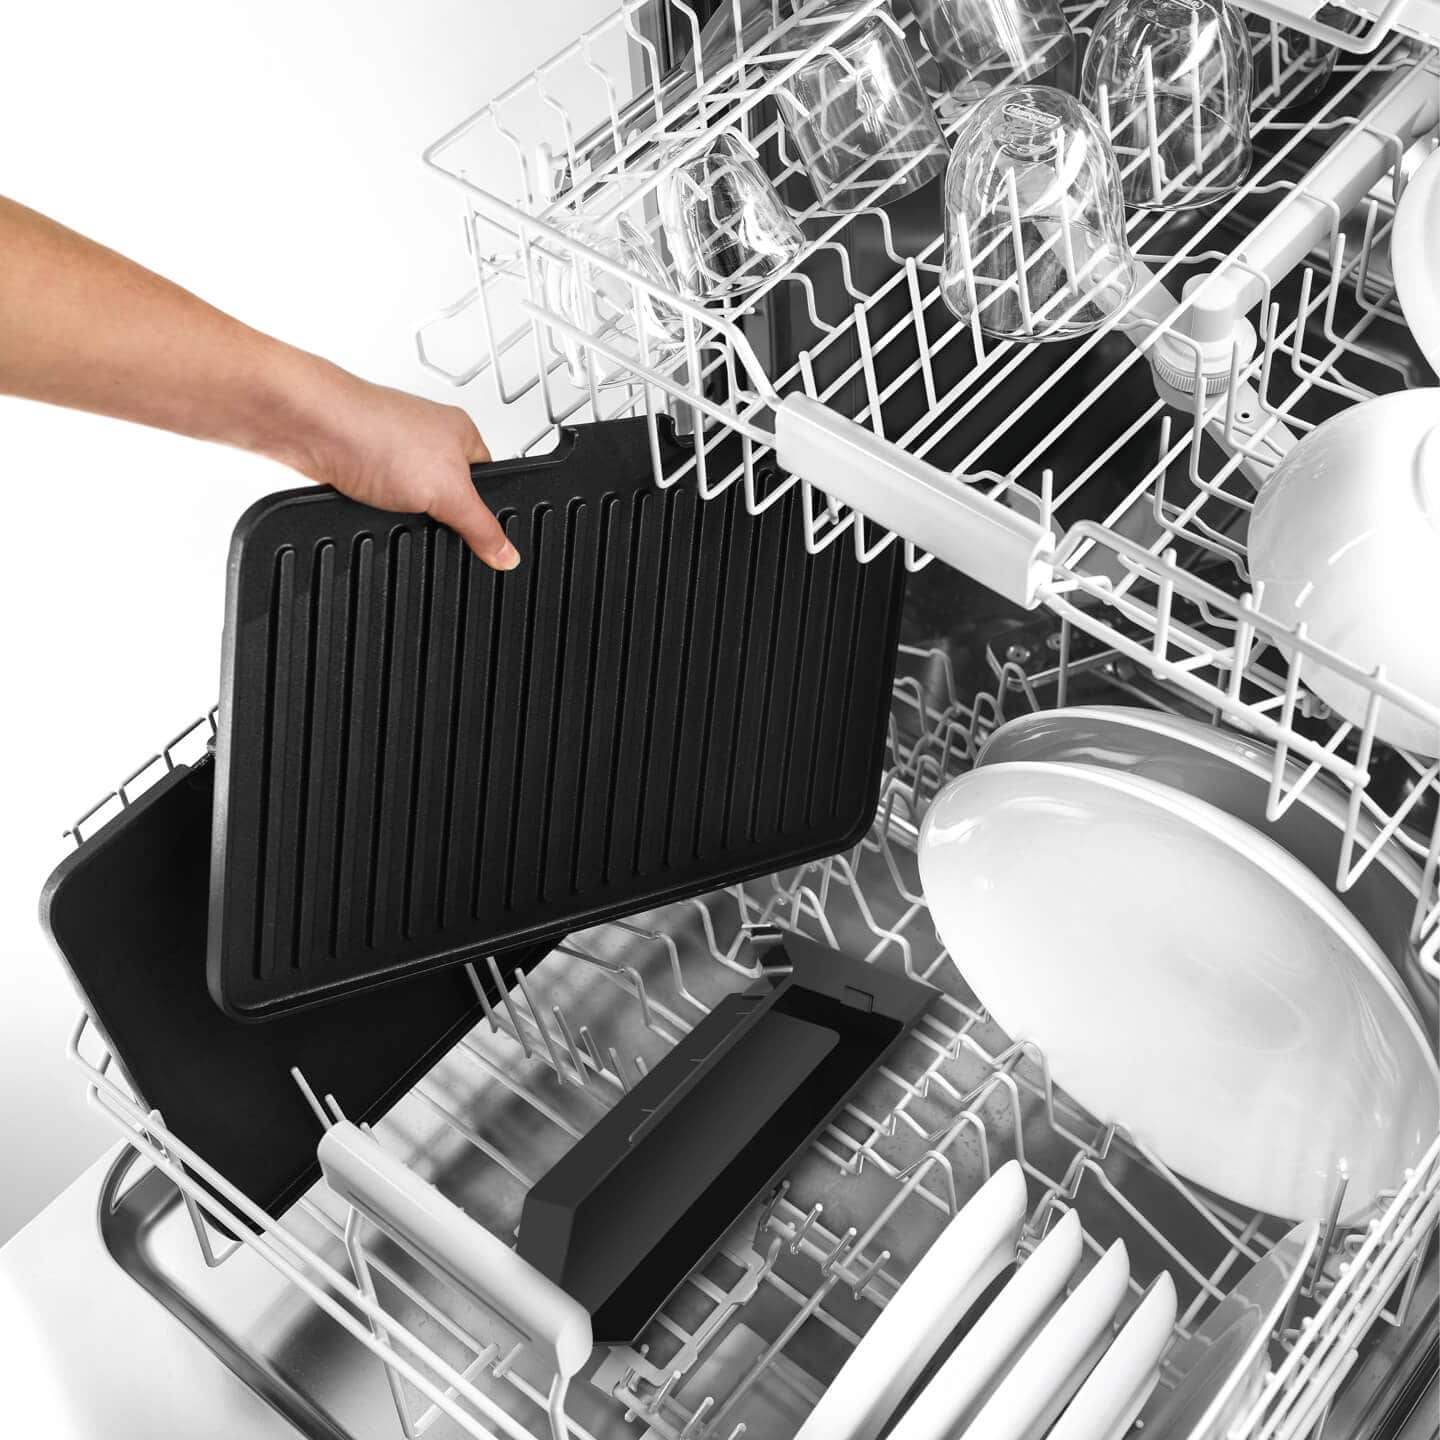 Braun Multifunctional contact grill-Dishwasher- safe removable parts